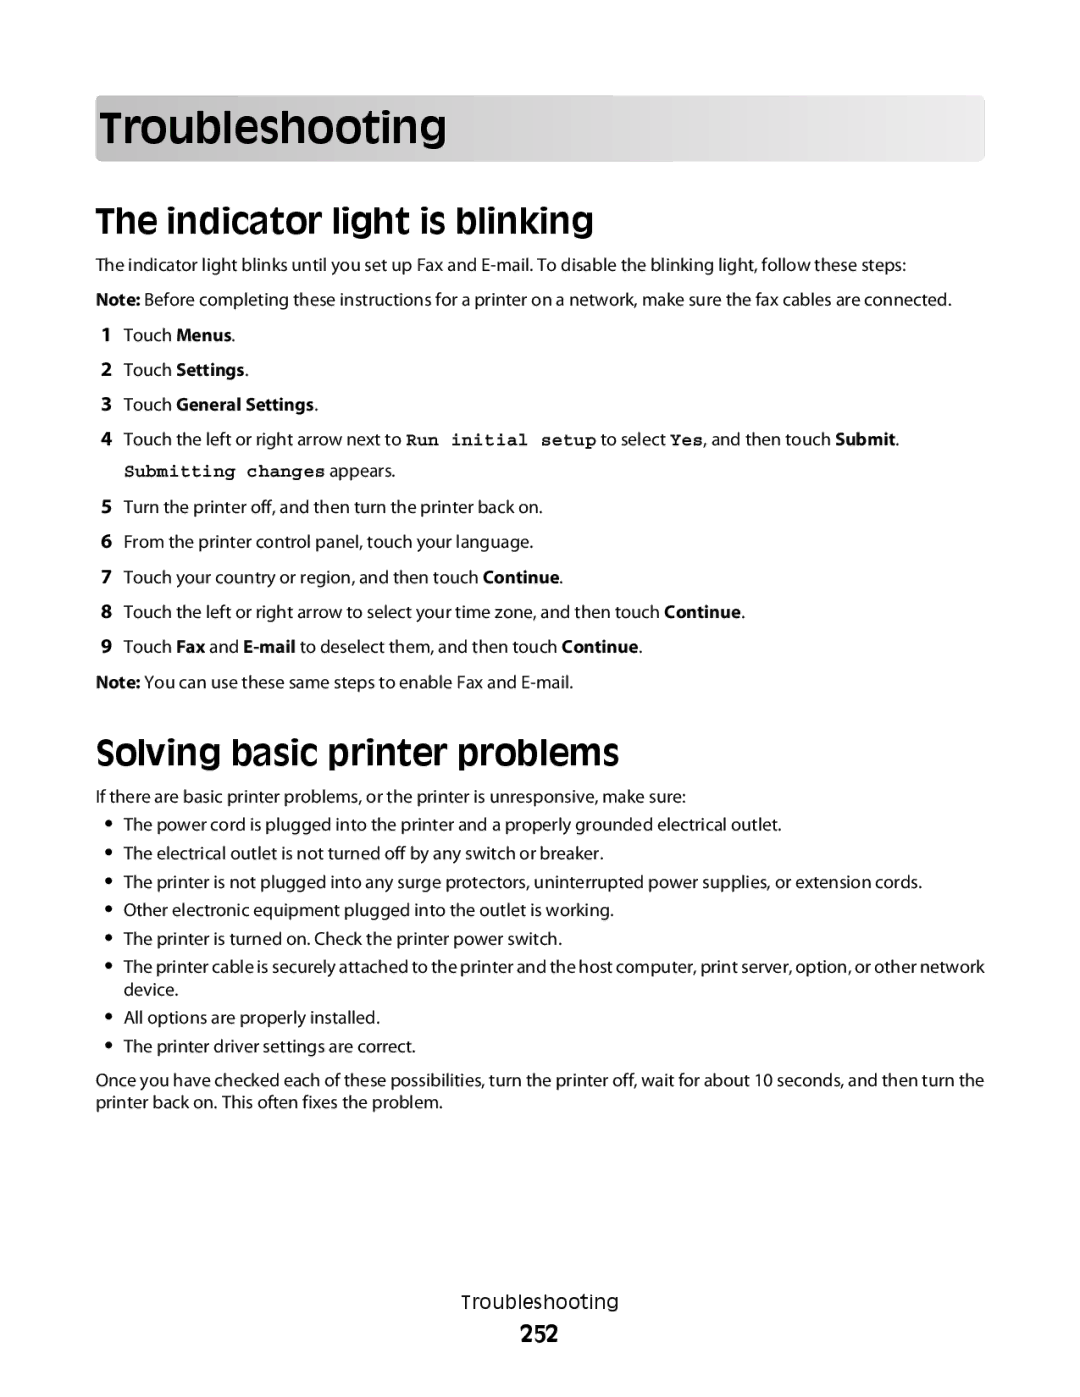 Lexmark MS00859, MS00853, MS00850, MS00855 Troubleshooting, Indicator light is blinking, Solving basic printer problems, 252 